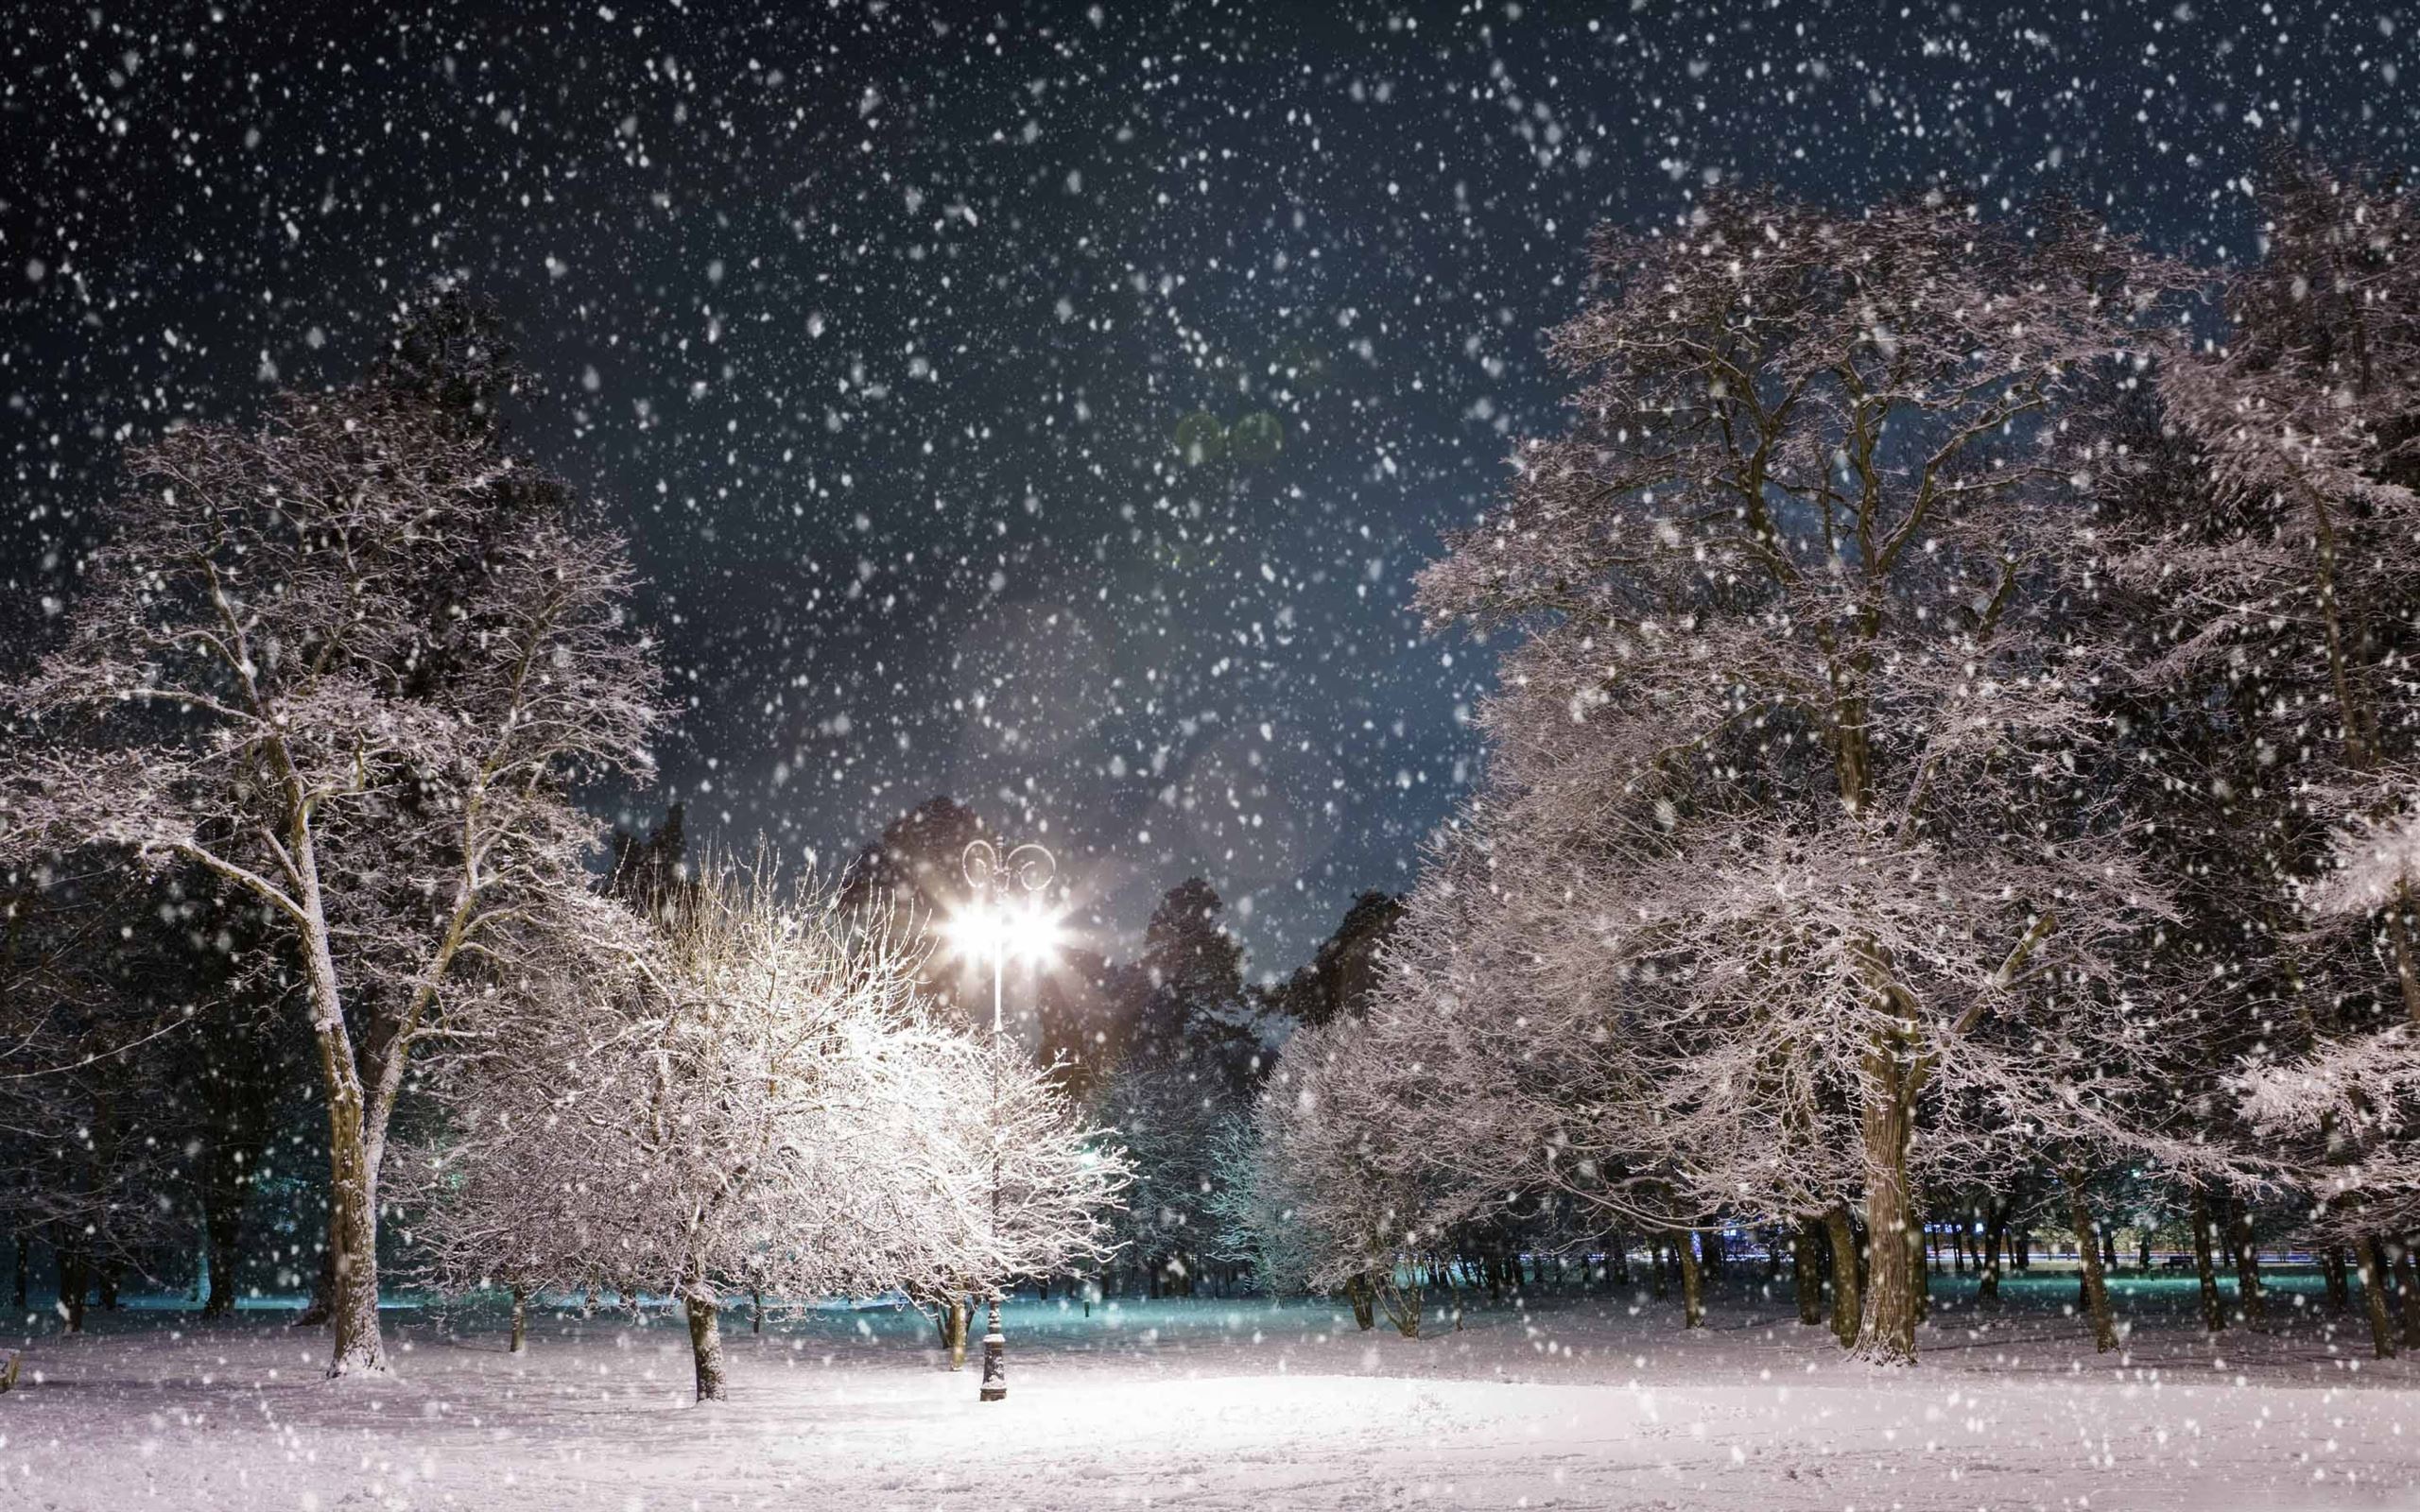 Snow falls in a park with trees and streetlights - Winter